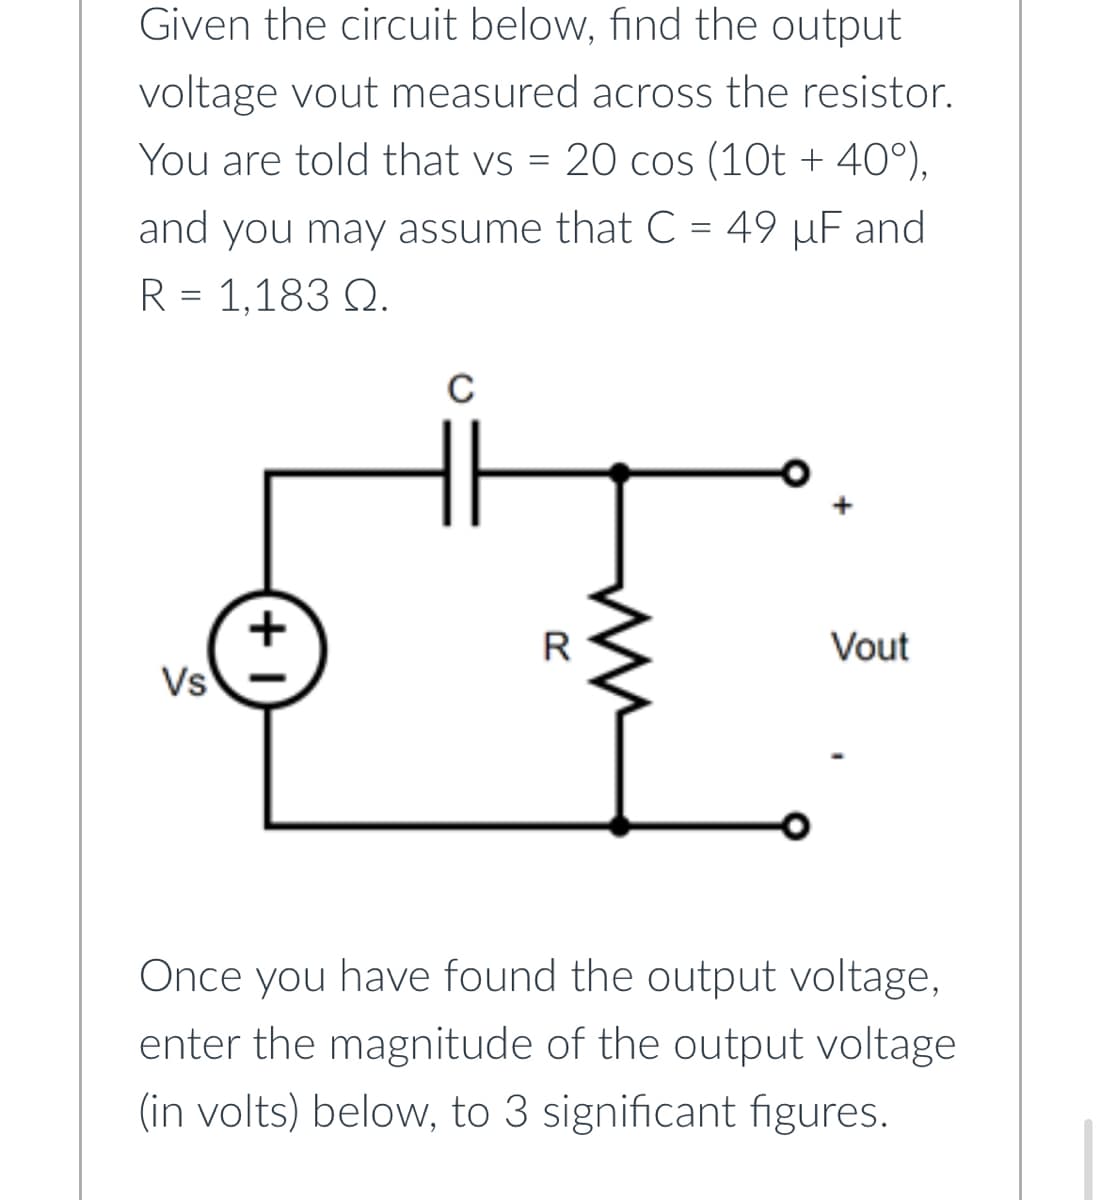 Given the circuit below, find the output
voltage vout measured across the resistor.
You are told that vs = 20 cos (10t + 40°),
and you may assume that C = 49 µF and
R = 1,183 Q.
Vs
+1
с
R
Vout
Once you have found the output voltage,
enter the magnitude of the output voltage
(in volts) below, to 3 significant figures.